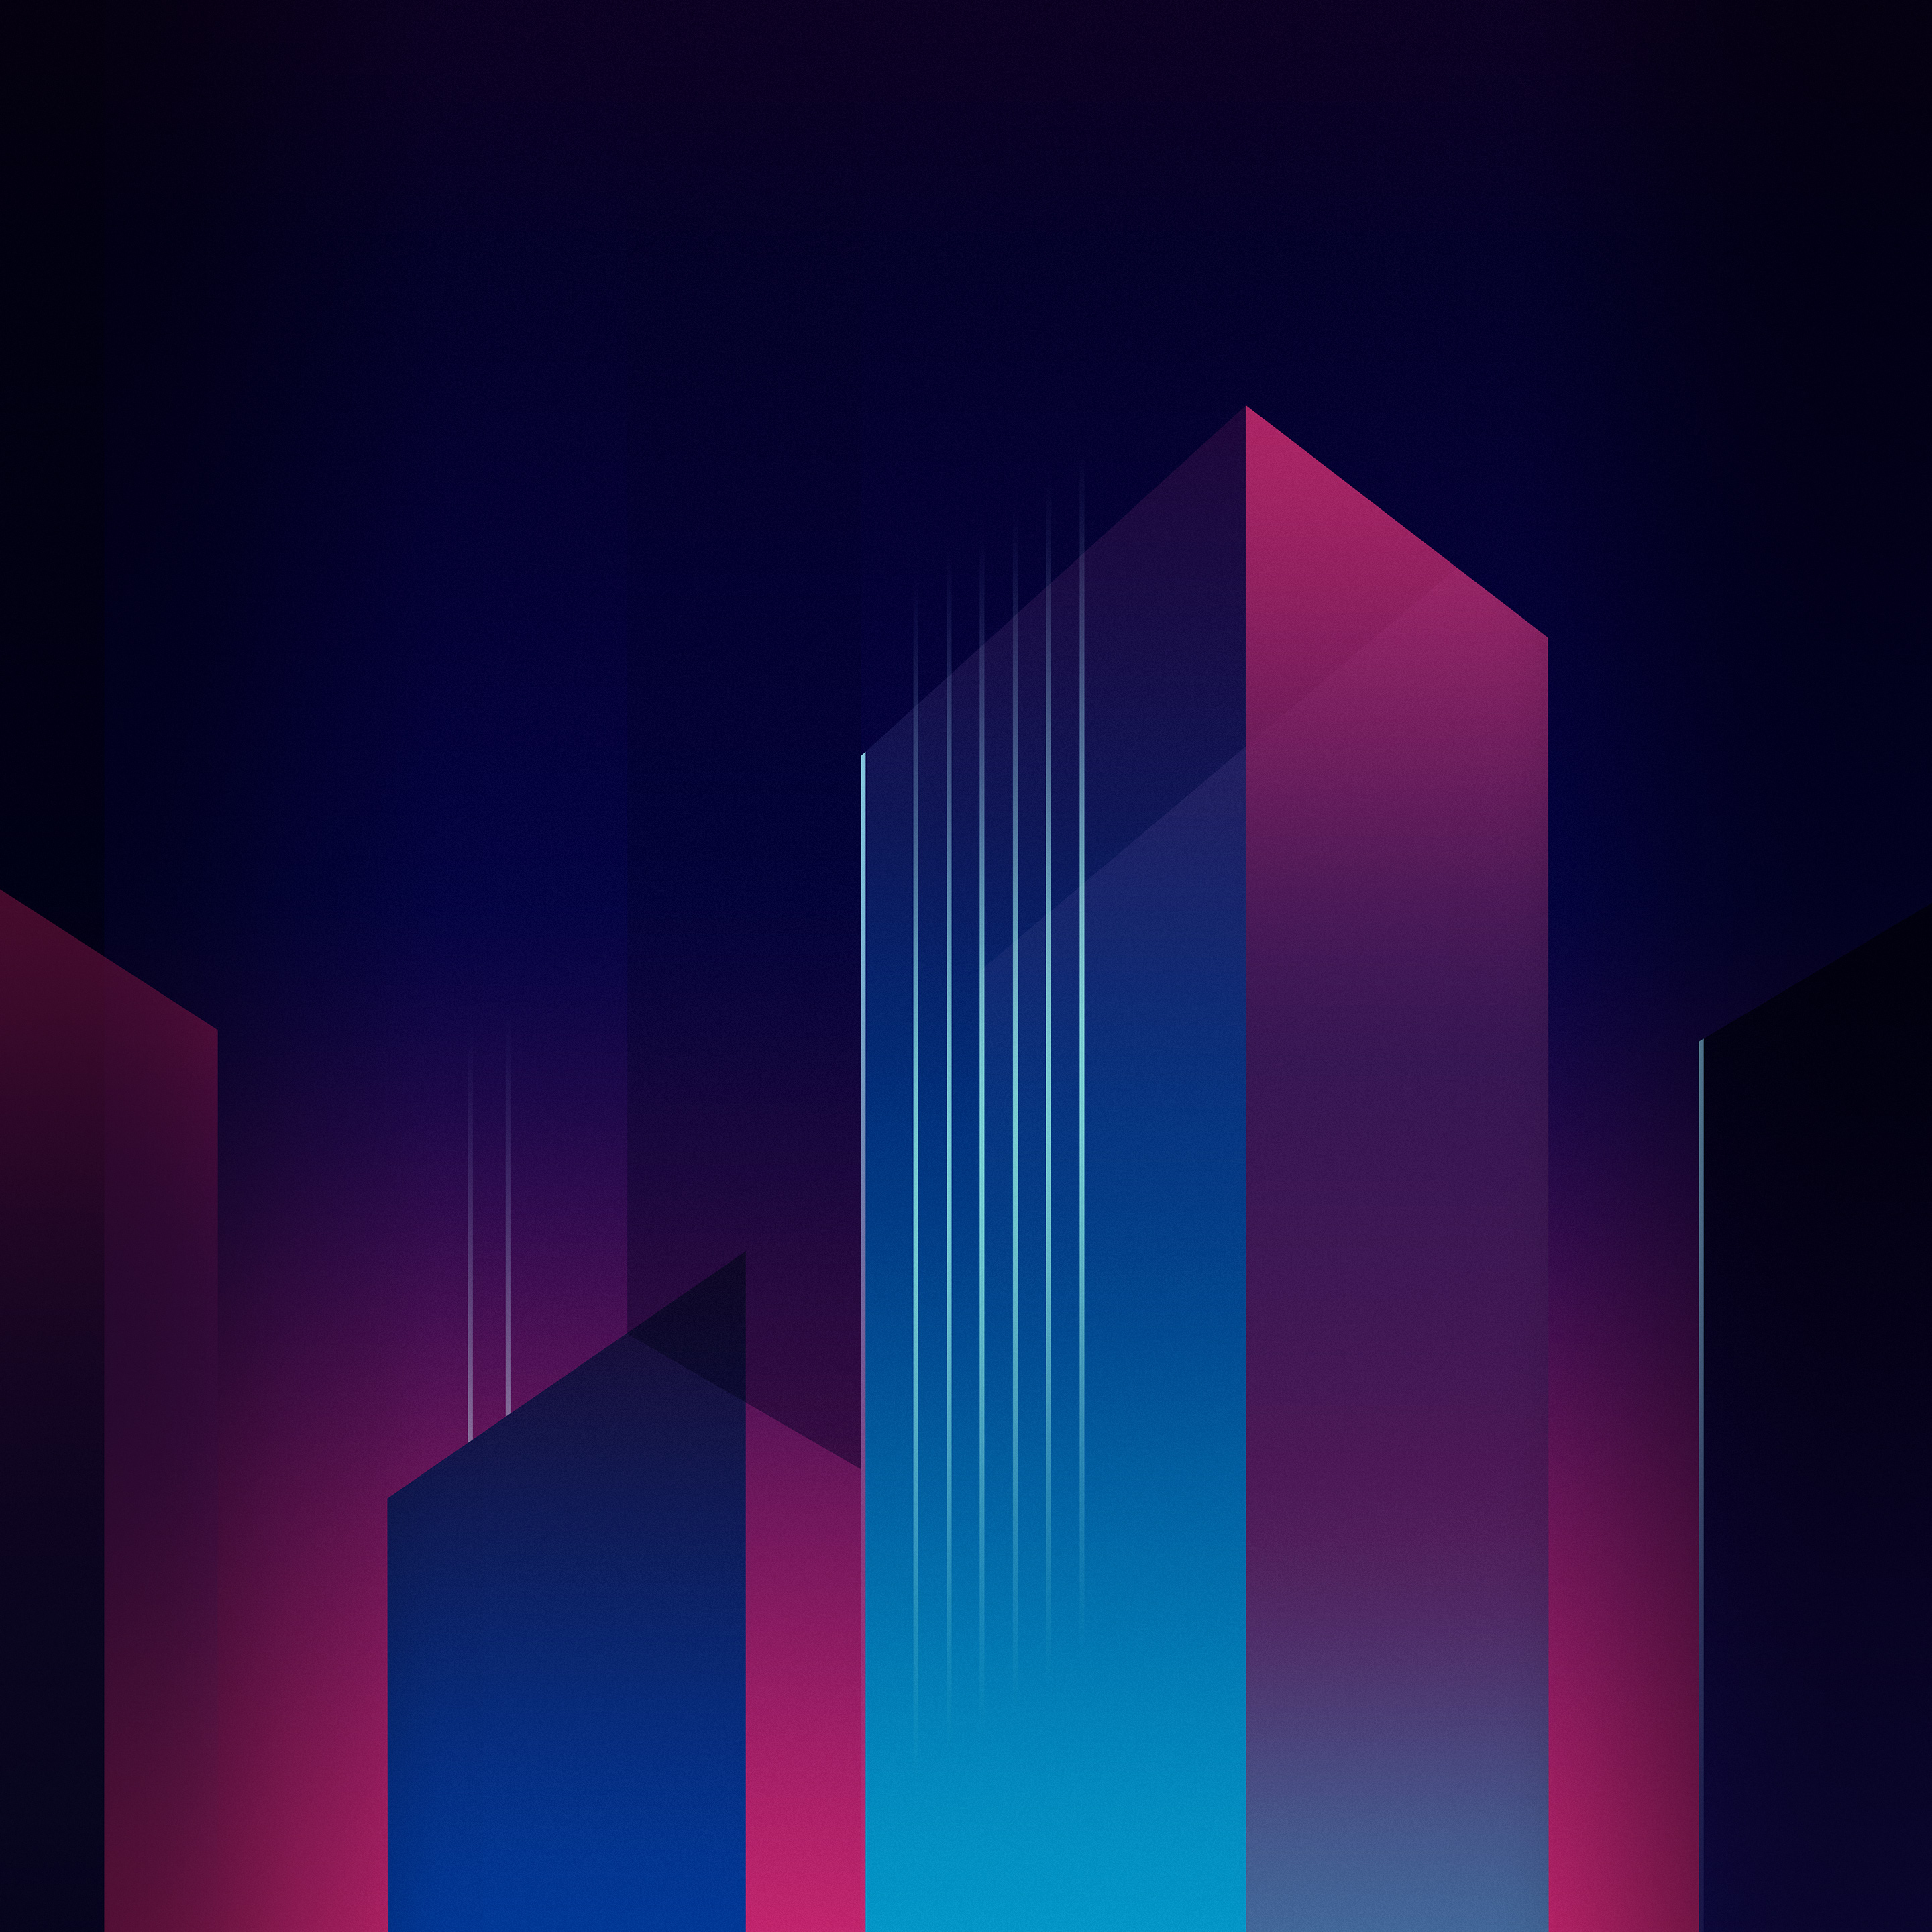 Get your hands on the HTC U11 Plus wallpaper now!